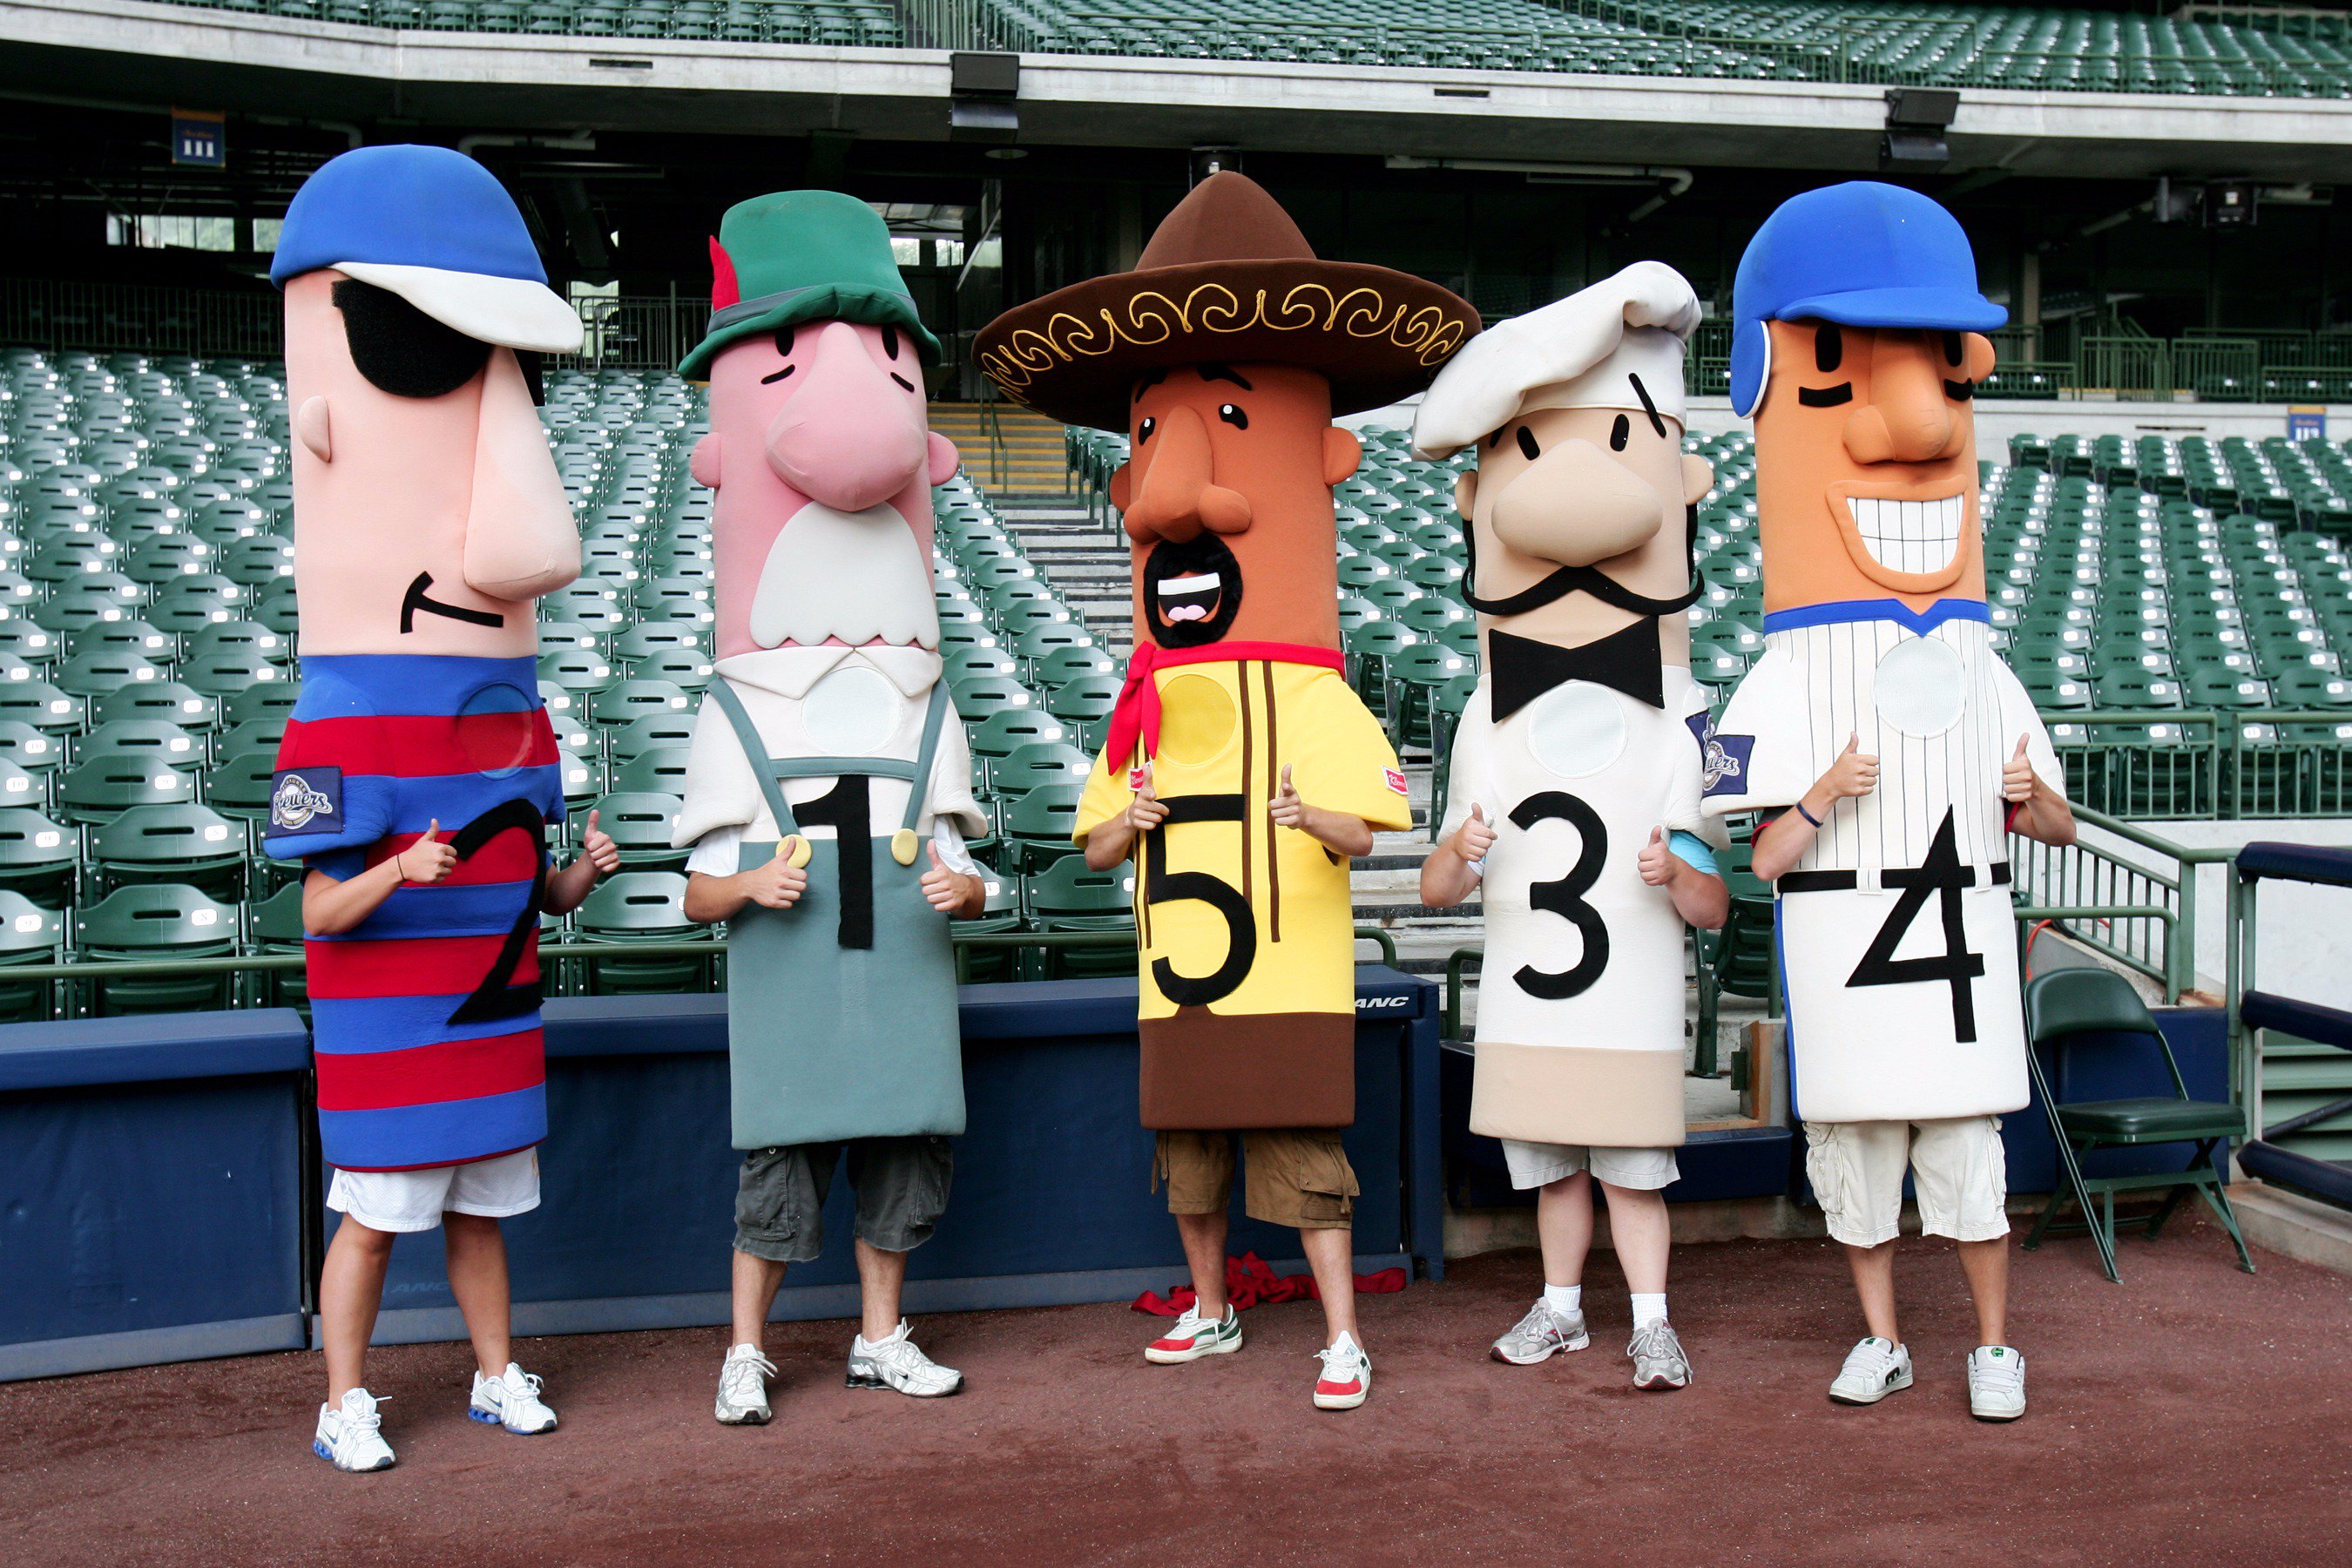 The sausage race at American Family Field! @brewers #brewers #brewersb